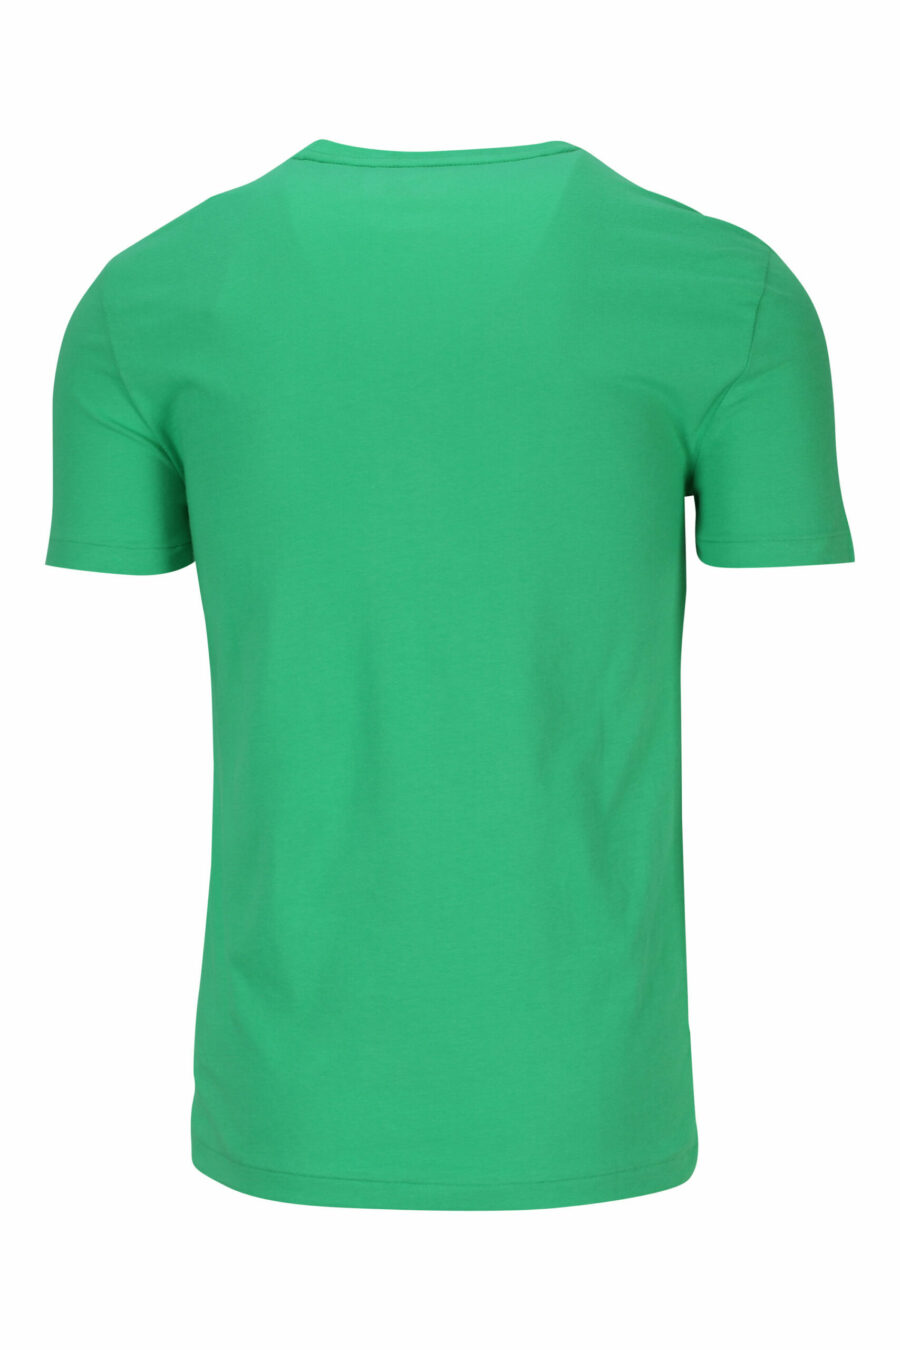 Green and yellow T-shirt with mini-logo "polo" - 3616535653825 1 scaled